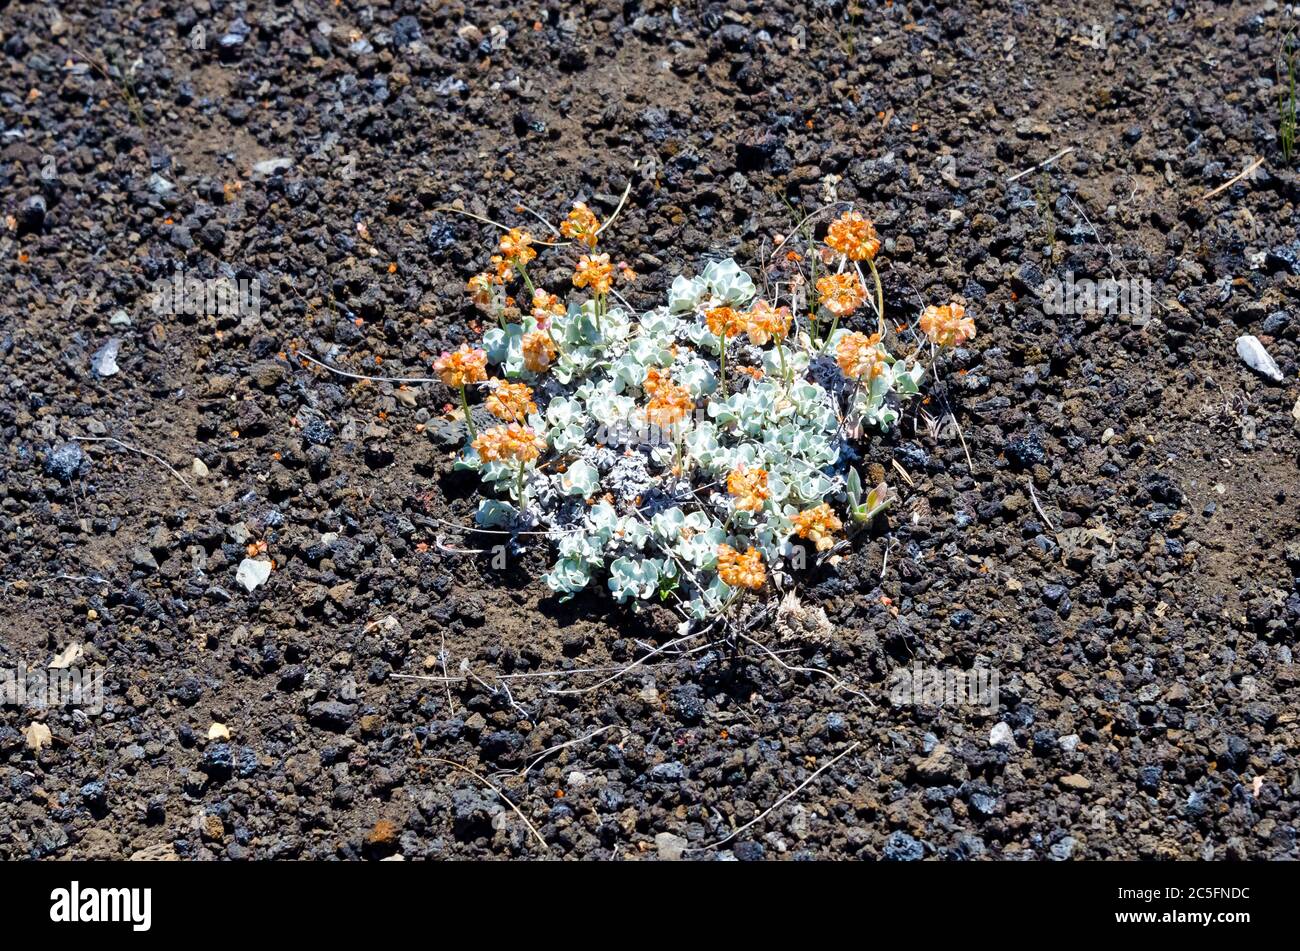 Cushion Buckwheat flower in the Craters of the Moon National Monument, Idaho, USA Stock Photo